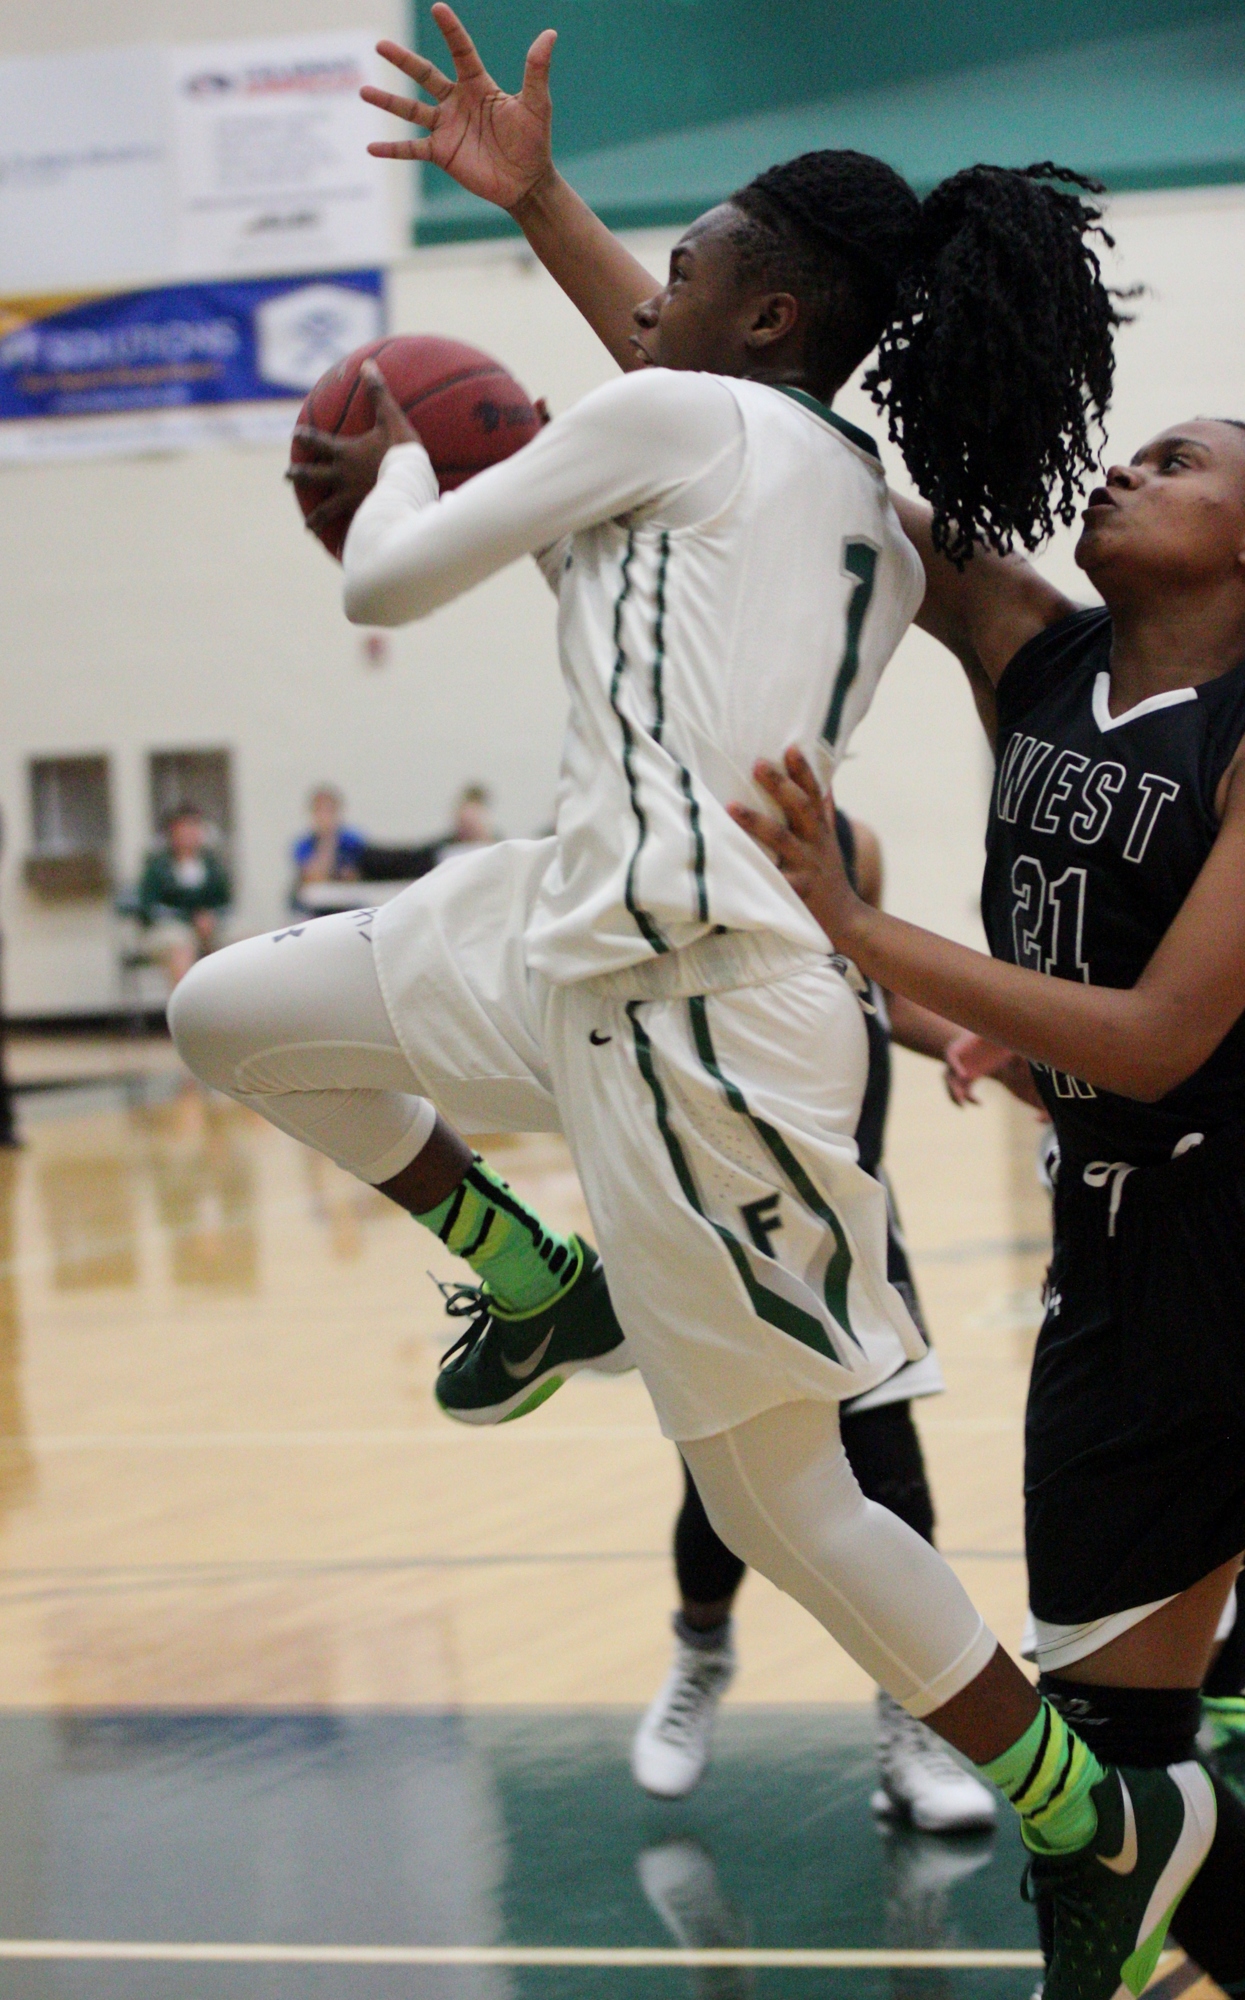 Ivana Boyd fearlessly penetrates the paint, drawing multiple fouls to help put her opposition in foul trouble.